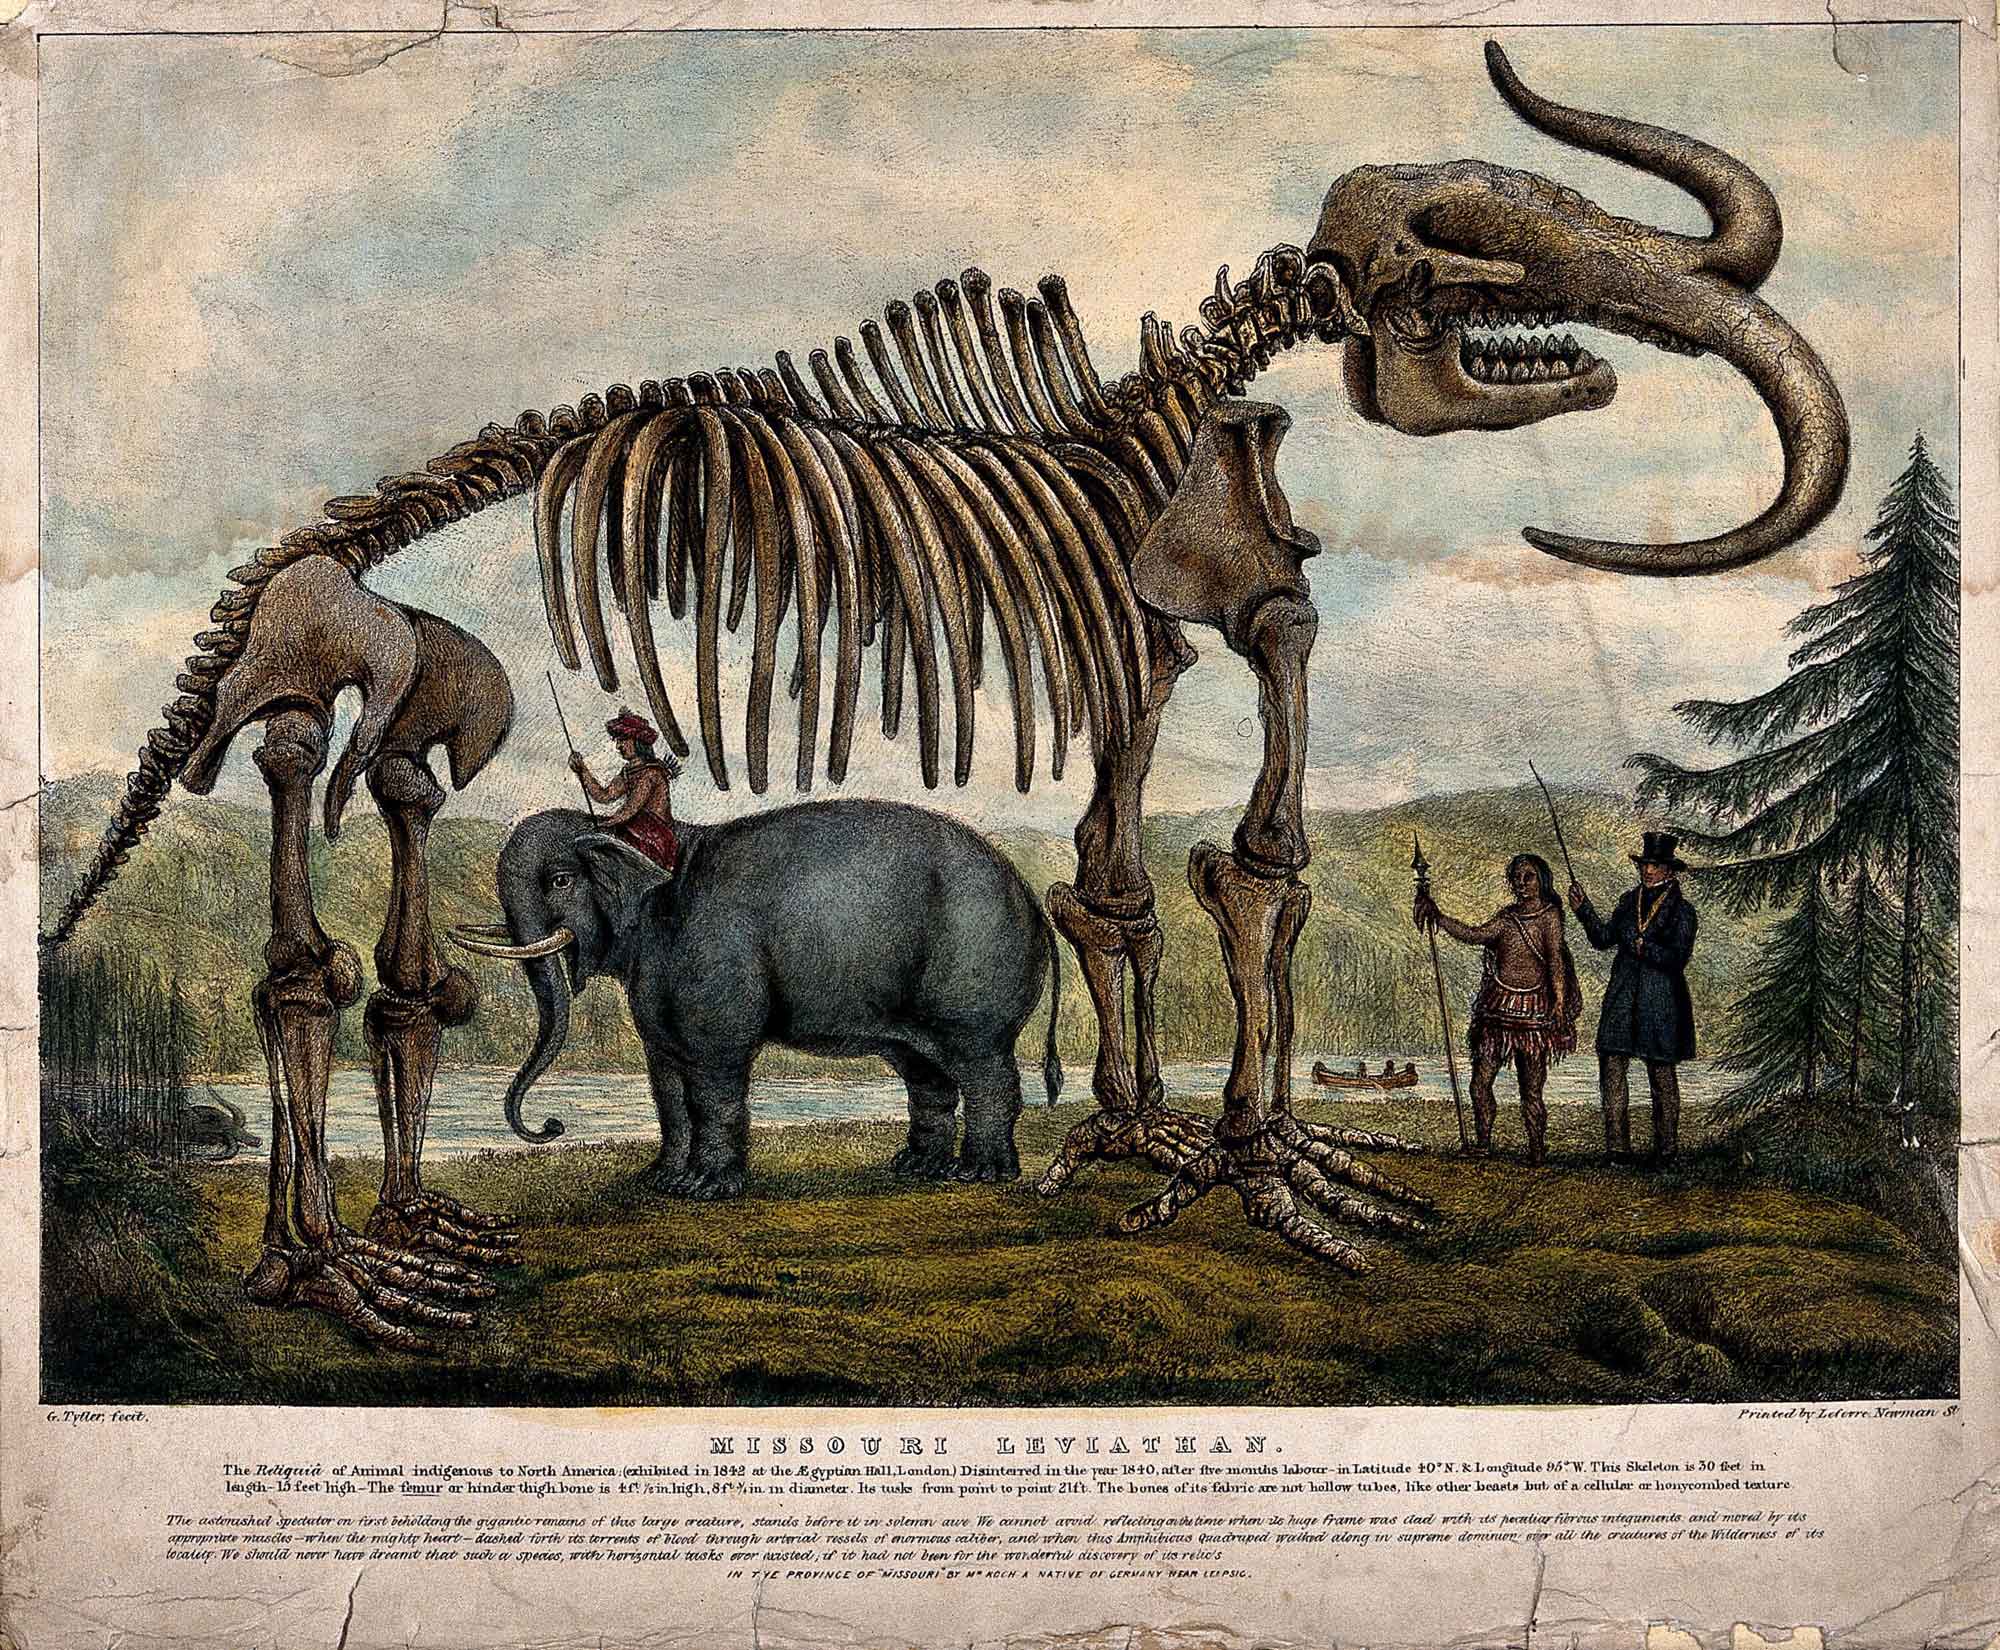 Lithograph of the reconstructed Missouri Leviathan skeleton from the 1800s. The skeleton is depicted as about twice the size of an Asian elephant with tusks curving outward.